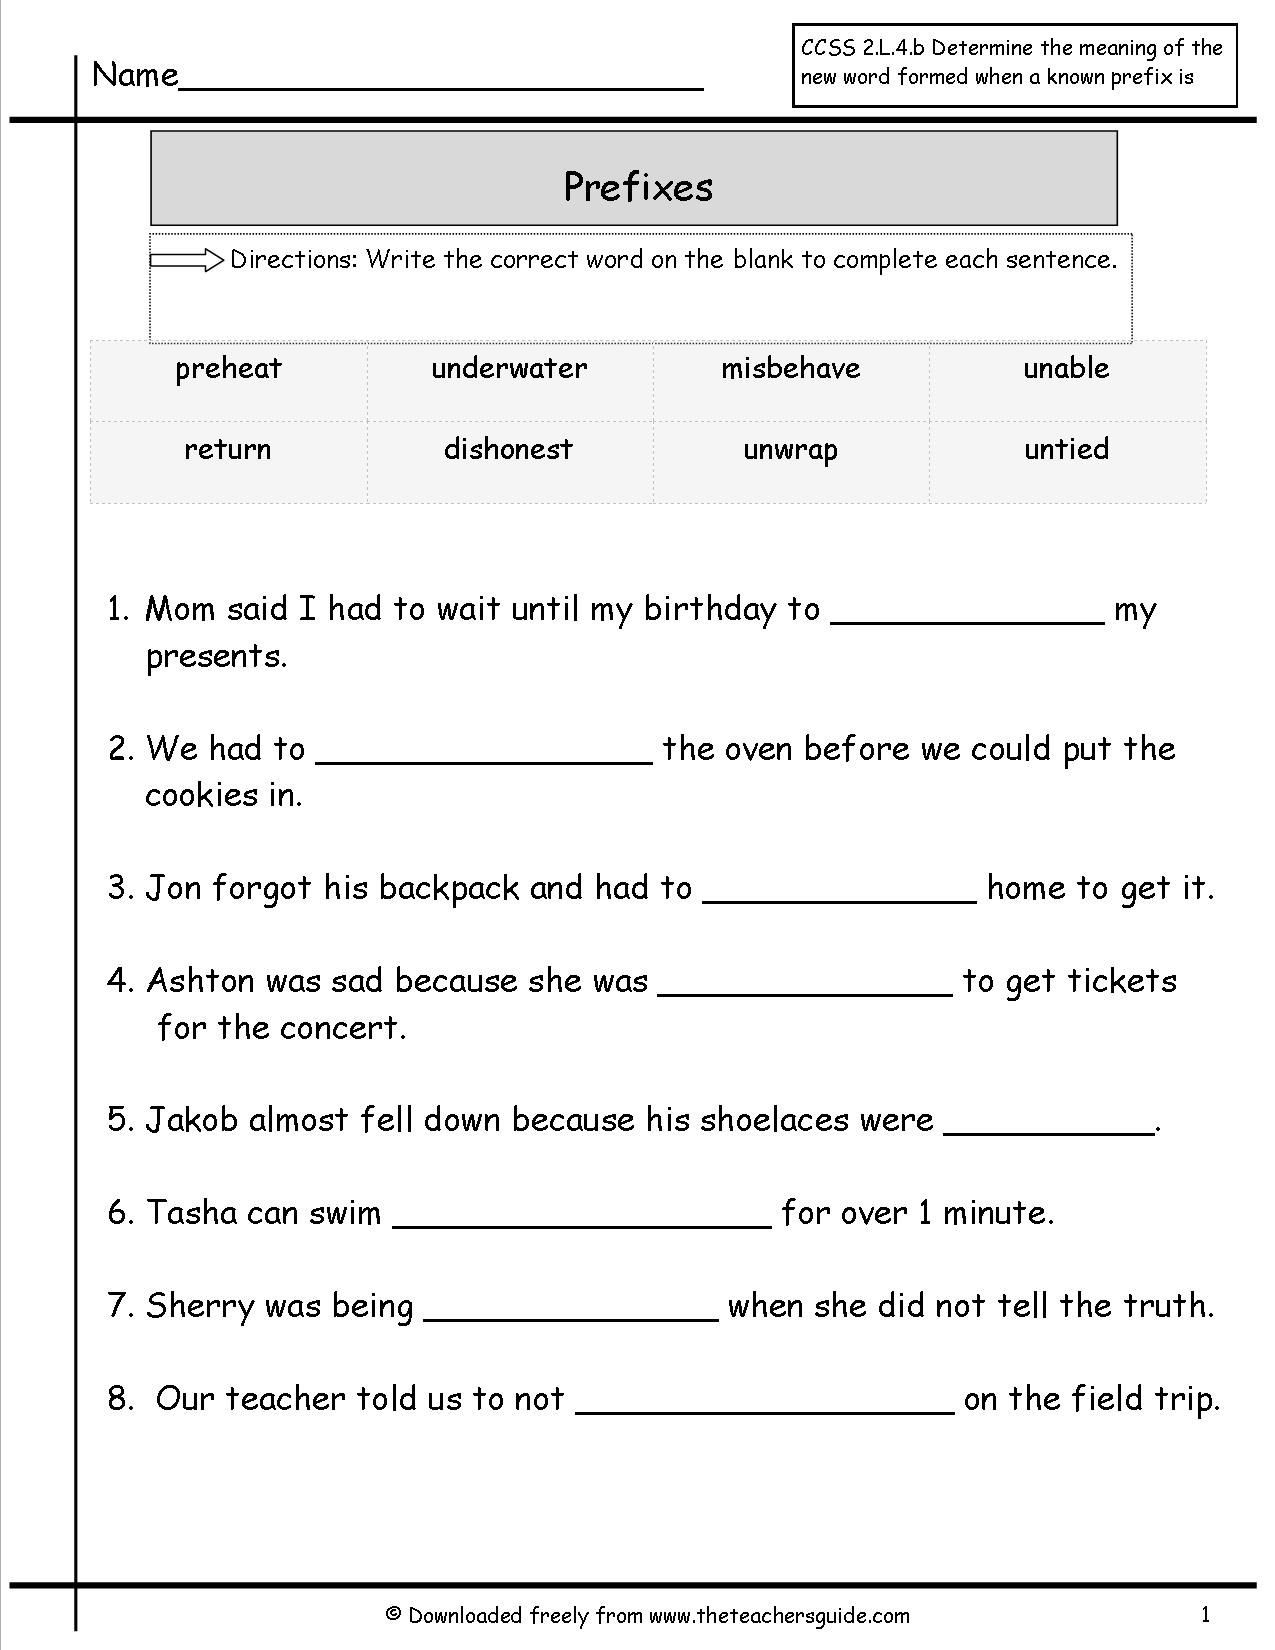 Prefixes Worksheets 3rd Grade Prefixes and Suffixes Worksheets Look at This One Next Week